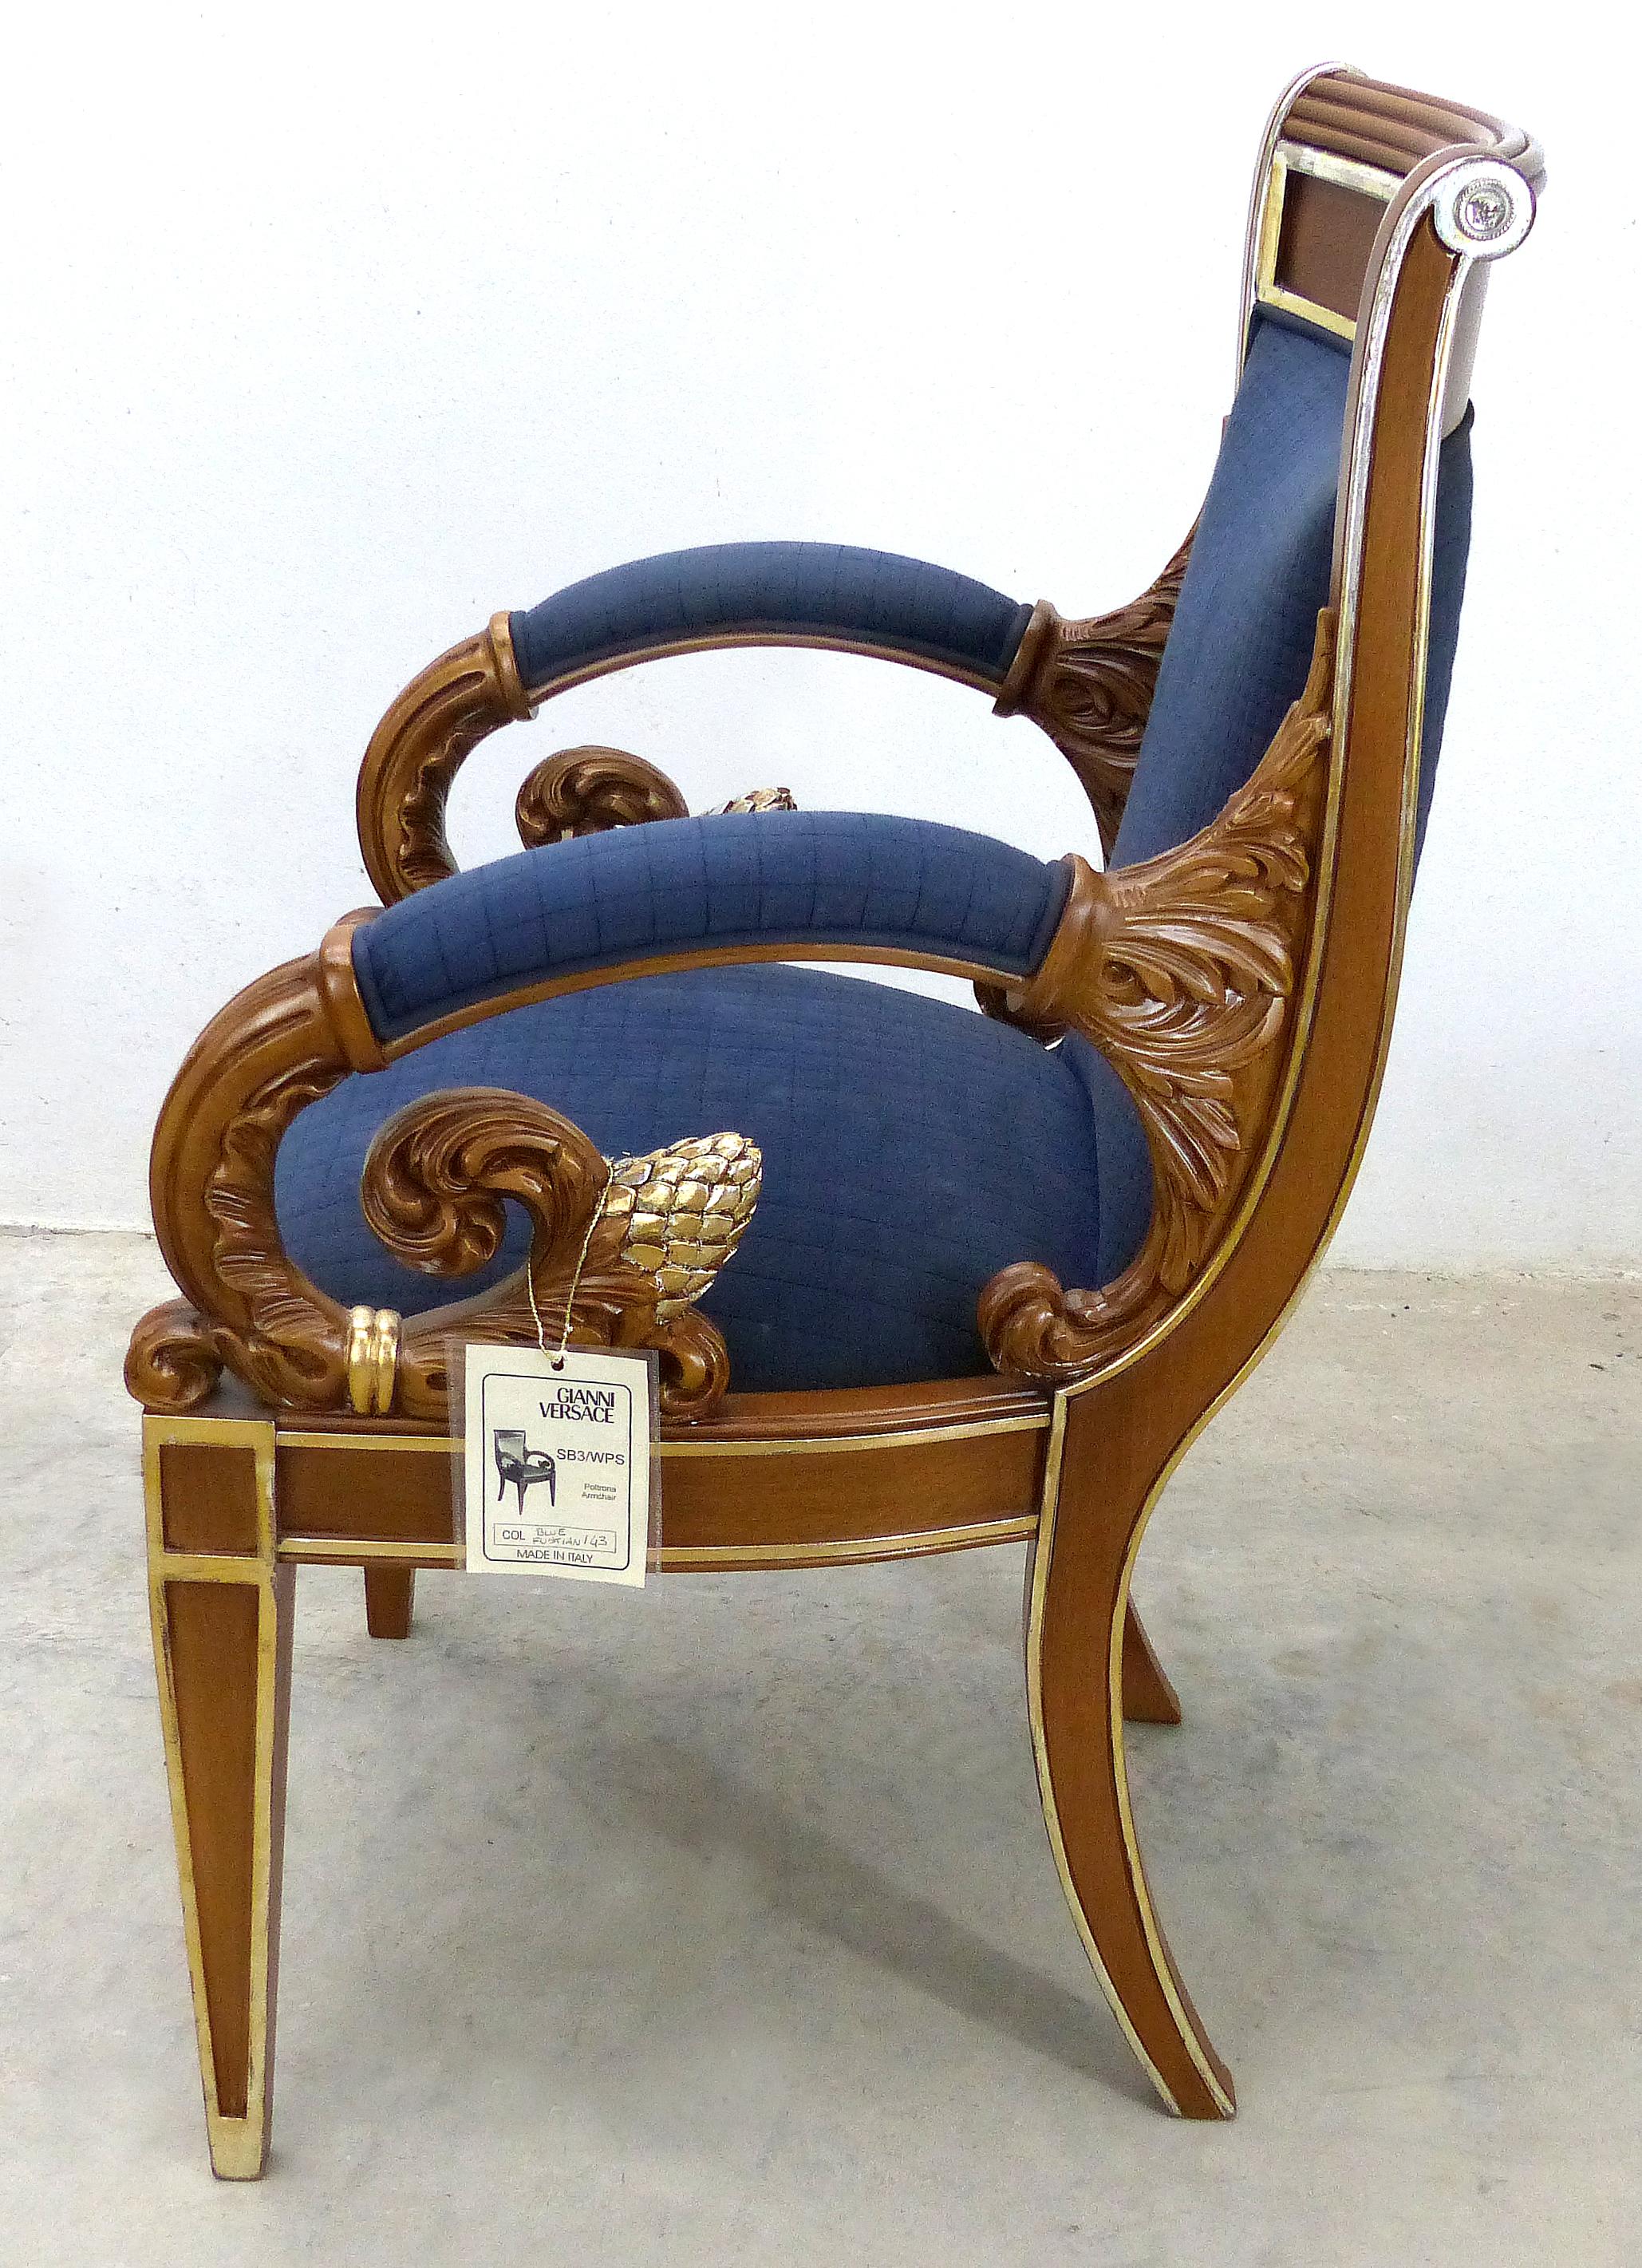 Baroque Revival Gianni Versace Vanitas Carved Armchair with a Scrolling Arm and Gilt Details